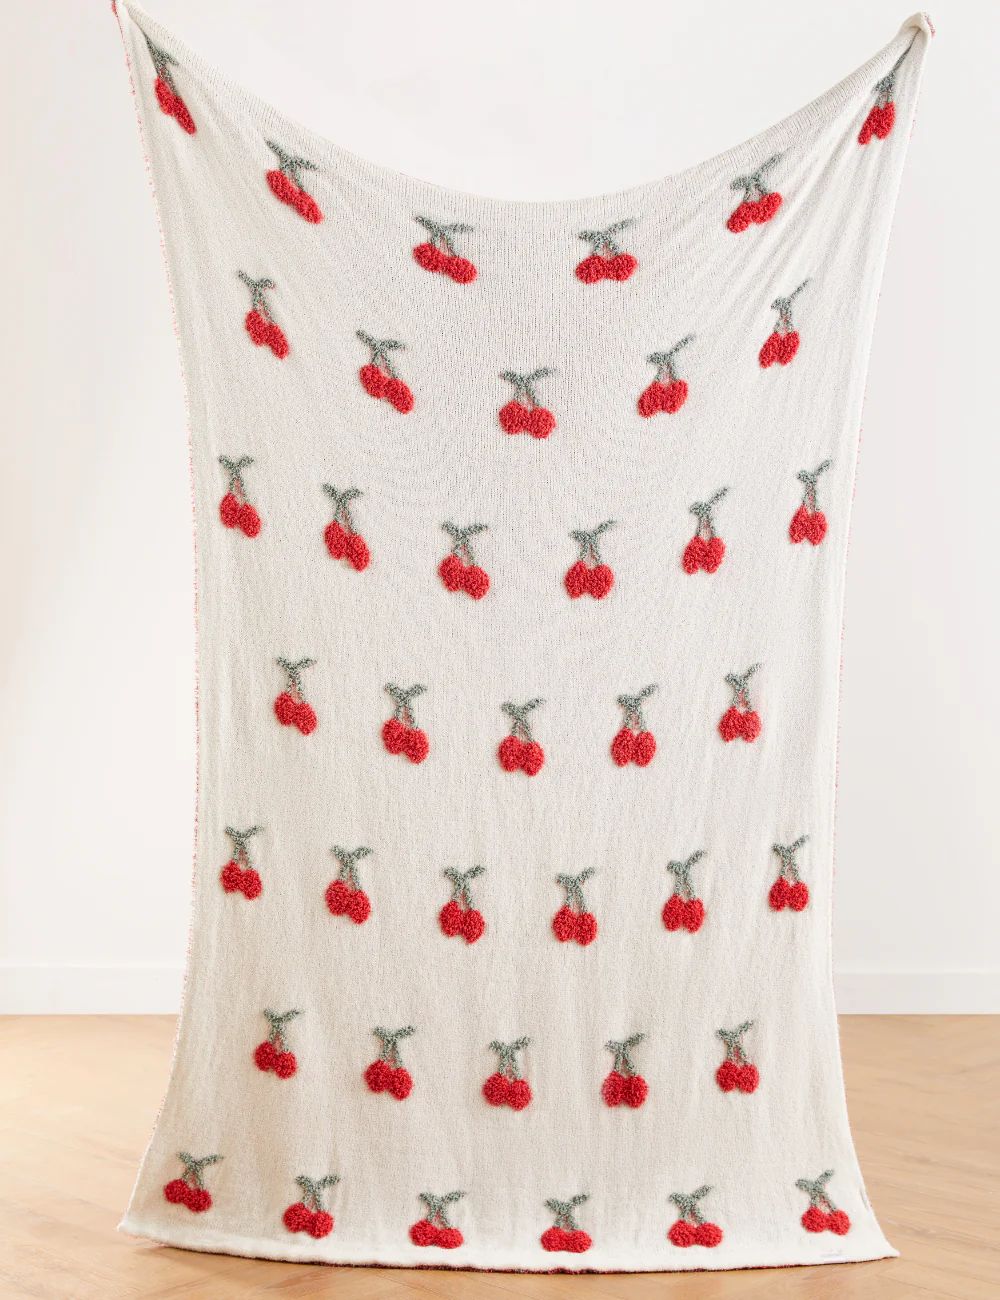 Cherries Buttery Blanket- Full Size Pre Order Feb 15th | The Styled Collection